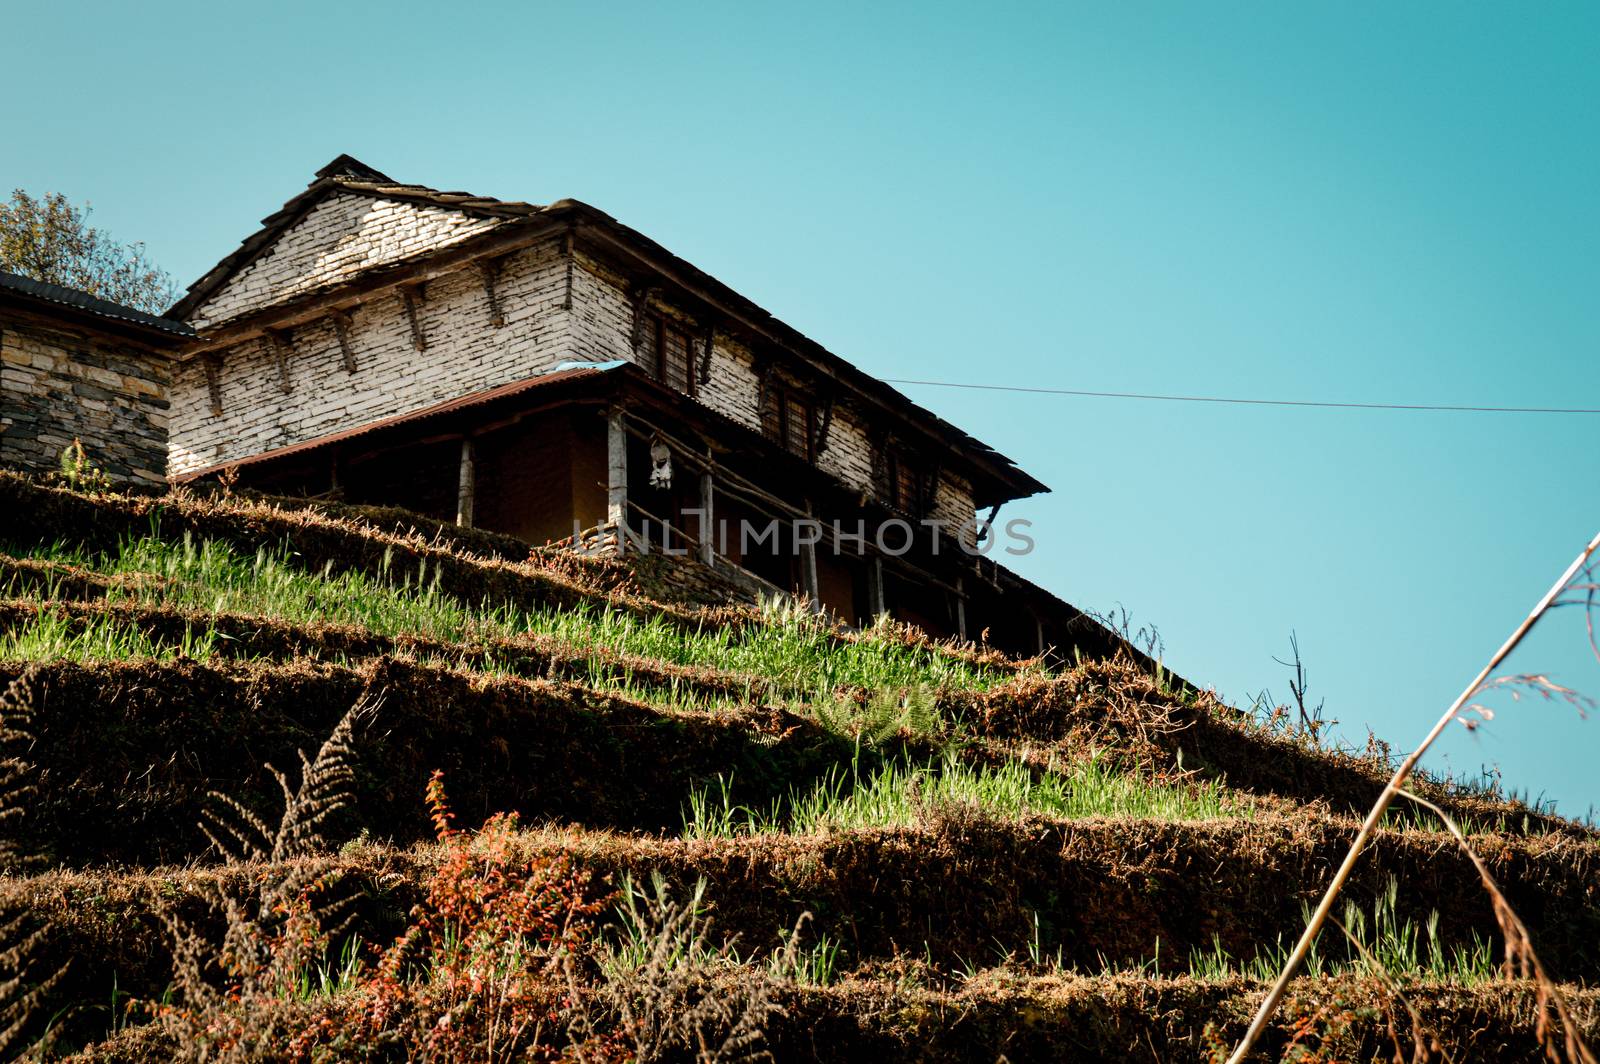 Traditional Nepalese Mud House by Sonnet15